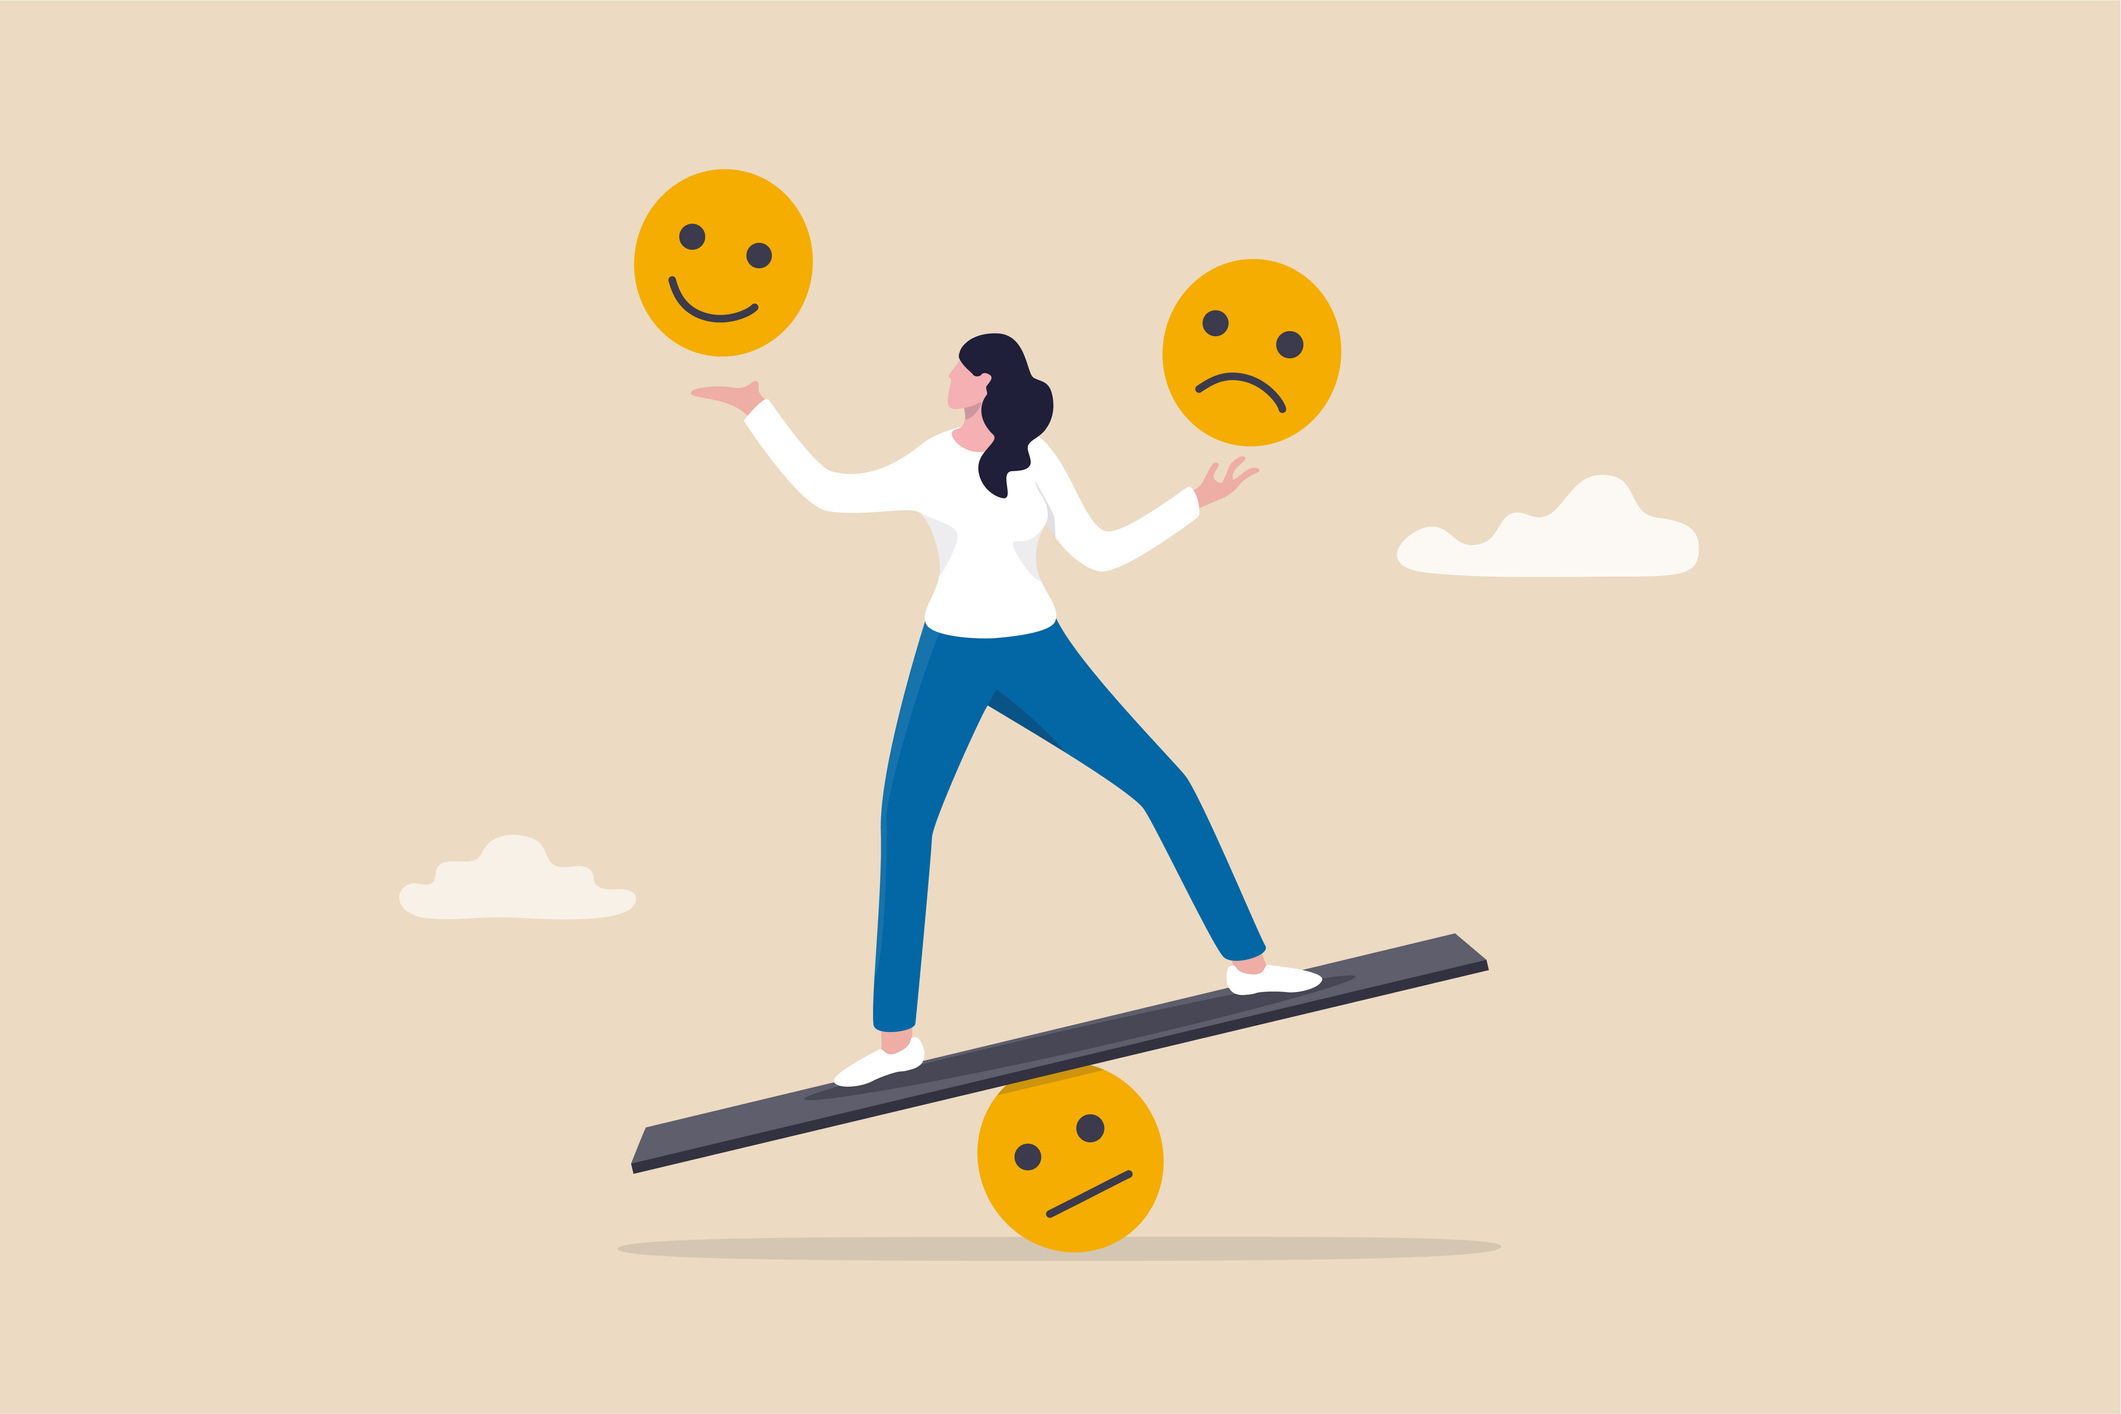 Stock Graphic of a Woman Figure Balancing on a Ball and Holding a Smiling Face in One Hand and A Sad Face in the Other Hand